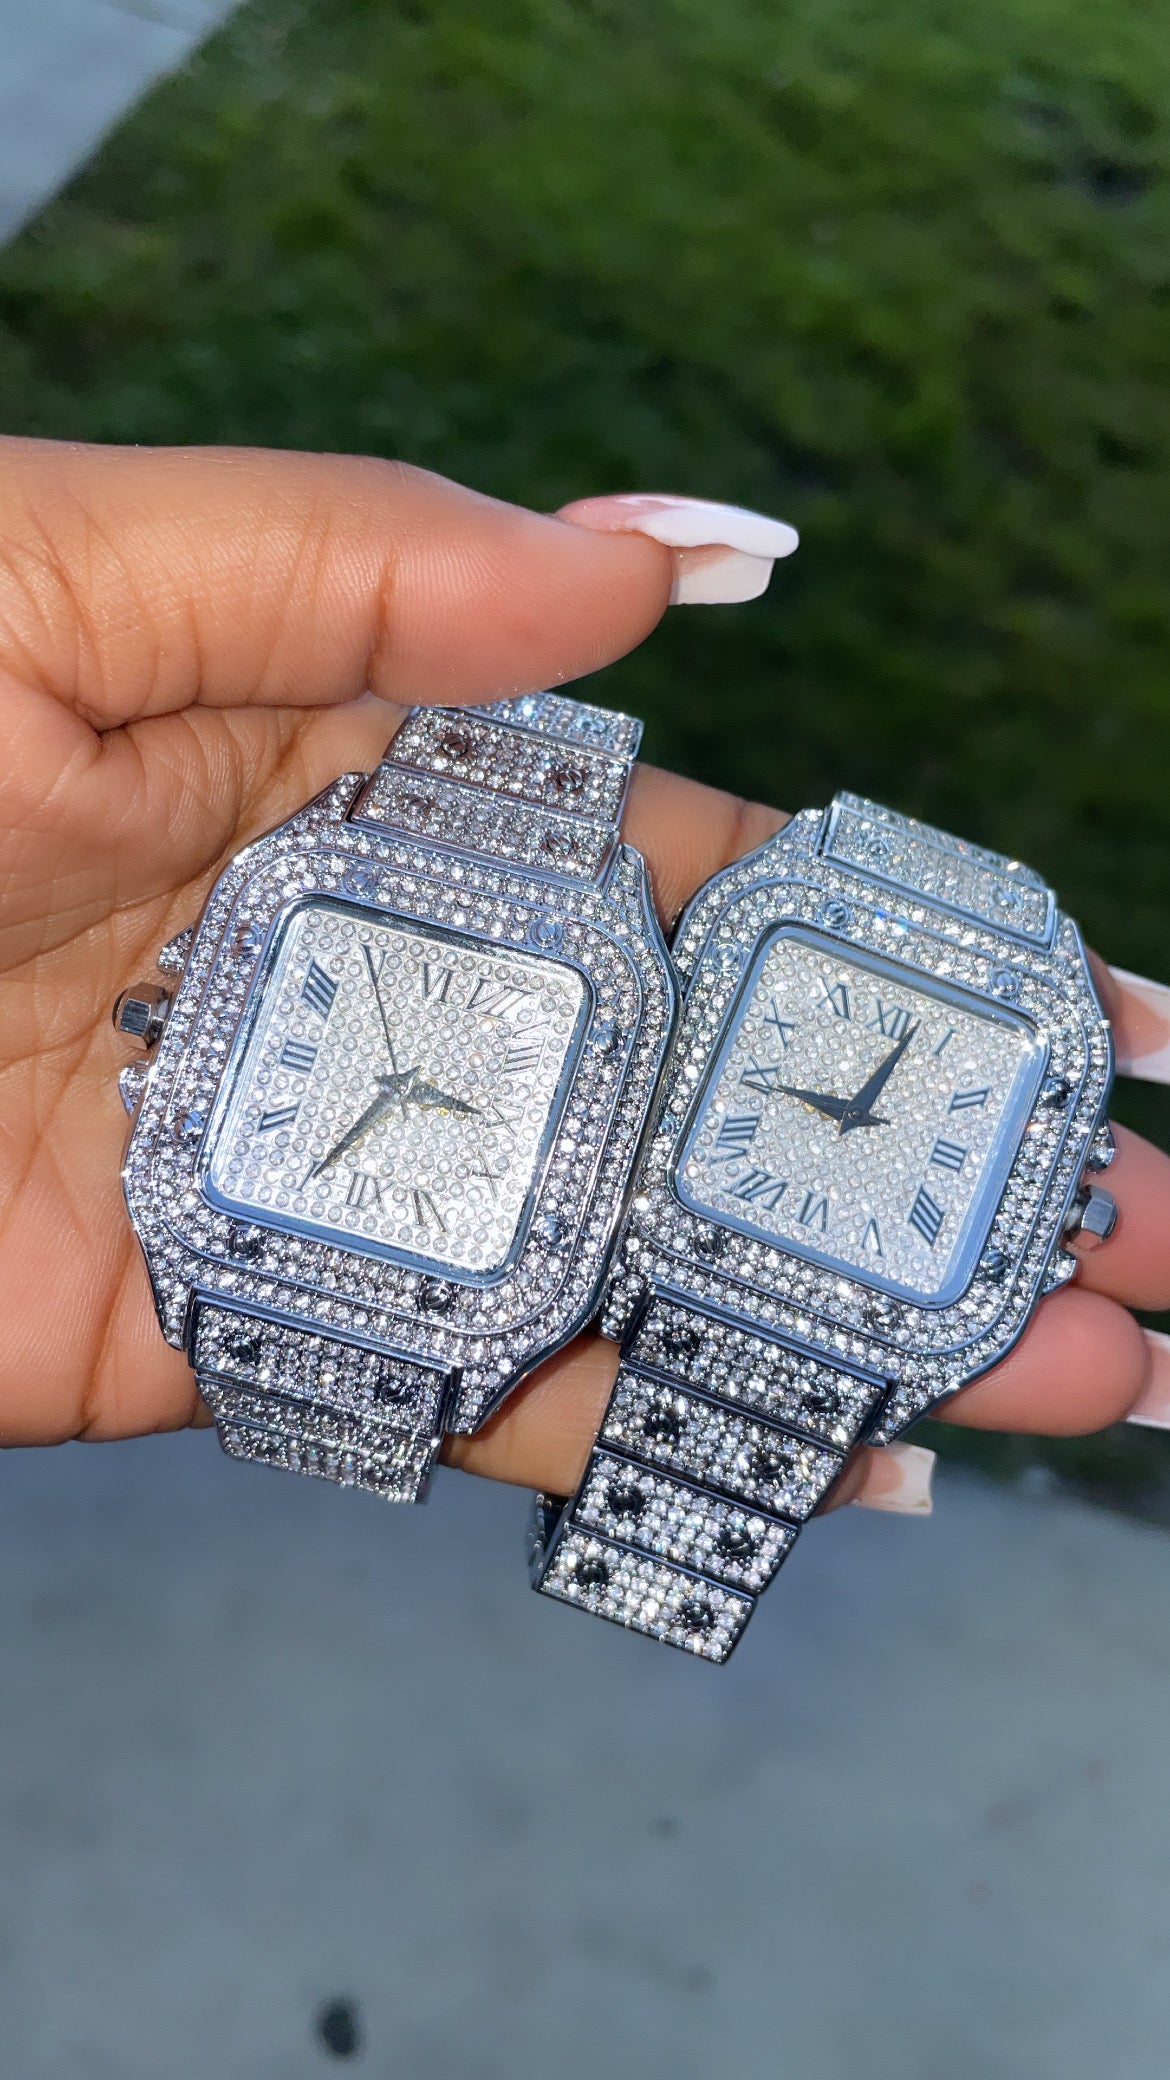 Luxury “Fully Iced Out” Watch